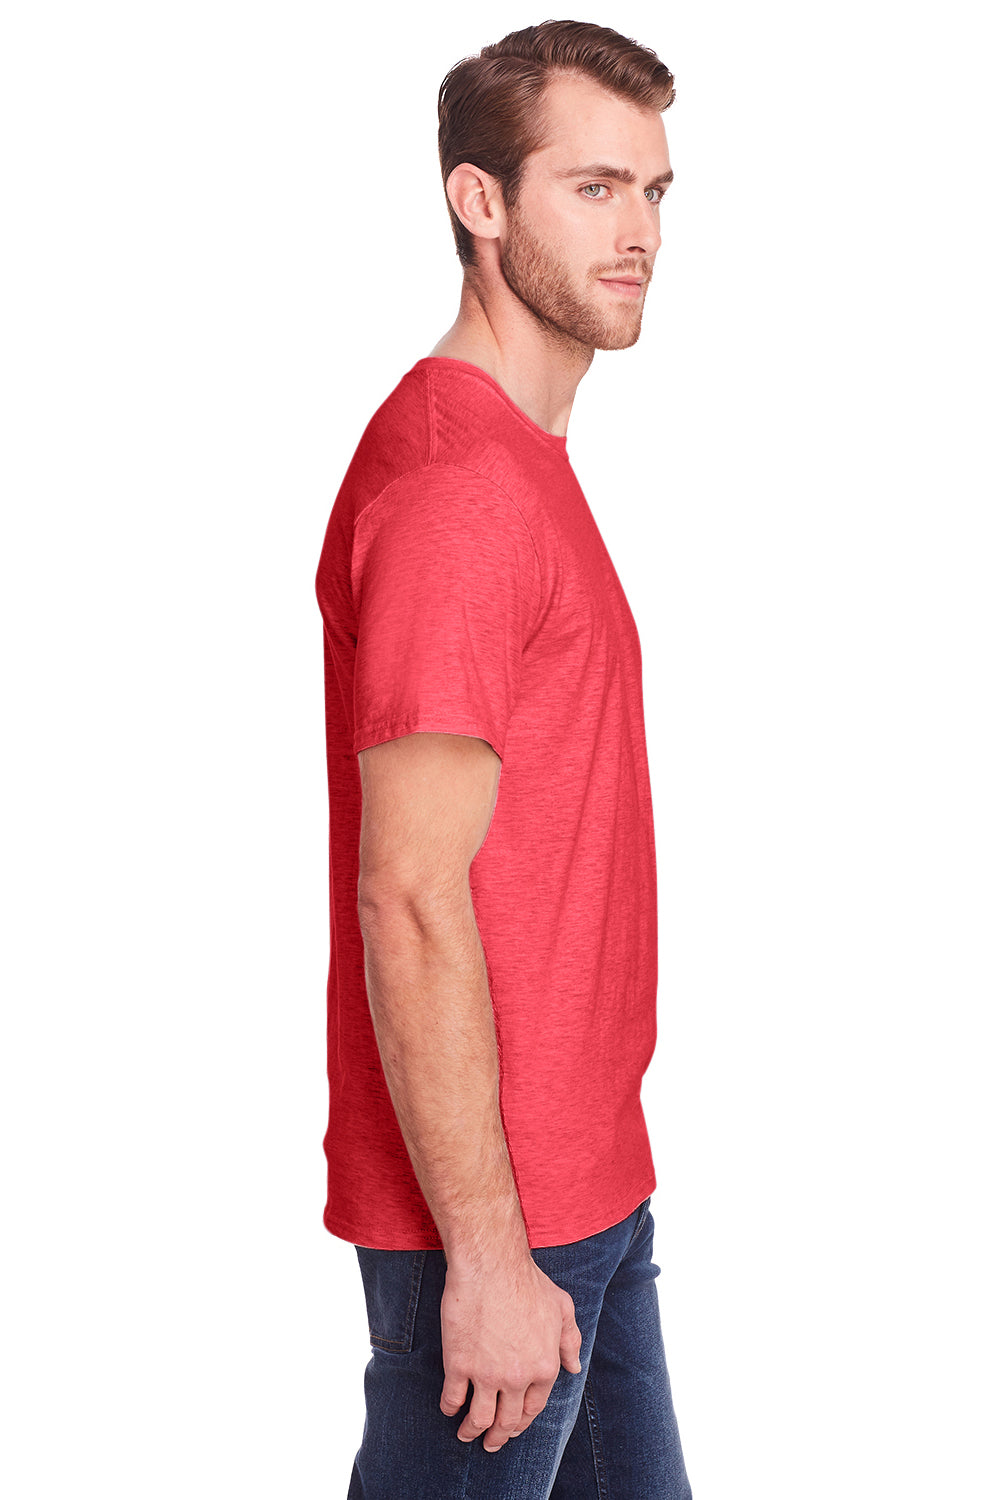 Fruit Of The Loom IC47MR Mens Iconic Short Sleeve Crewneck T-Shirt Heather Fiery Red Side